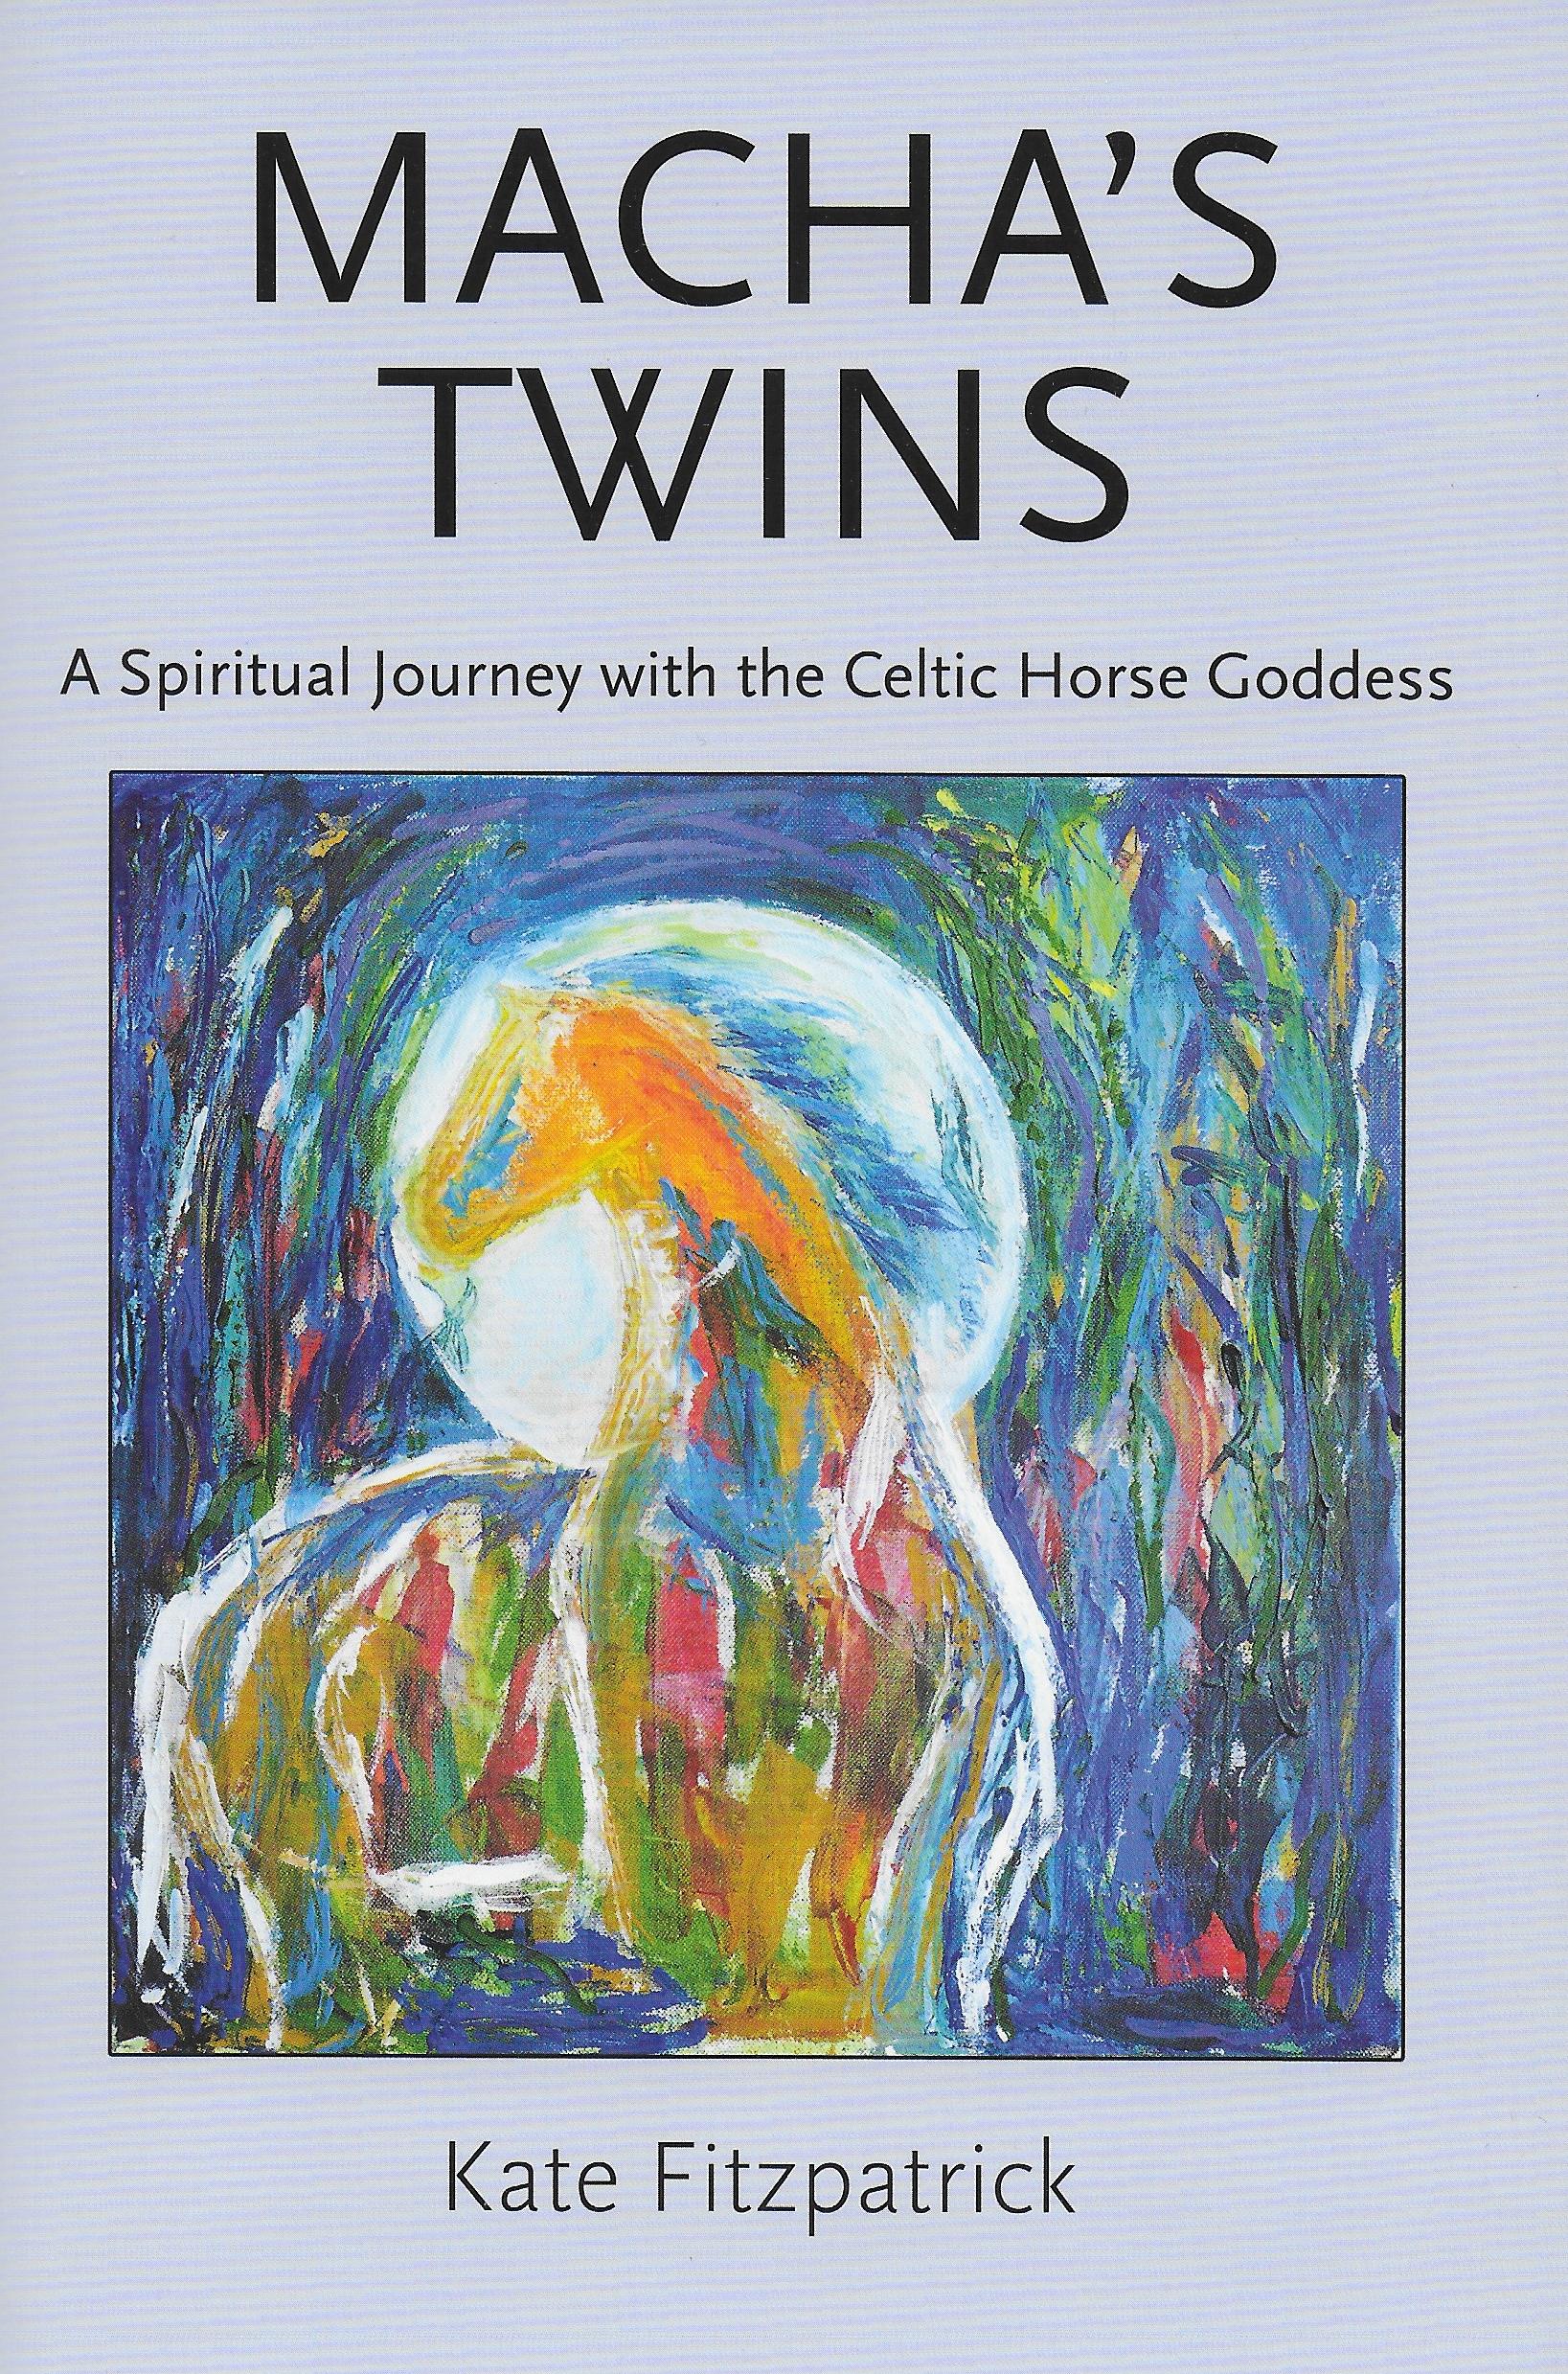 Macha's Twins: A Spiritual Journey with the Celtic Horse Goddess